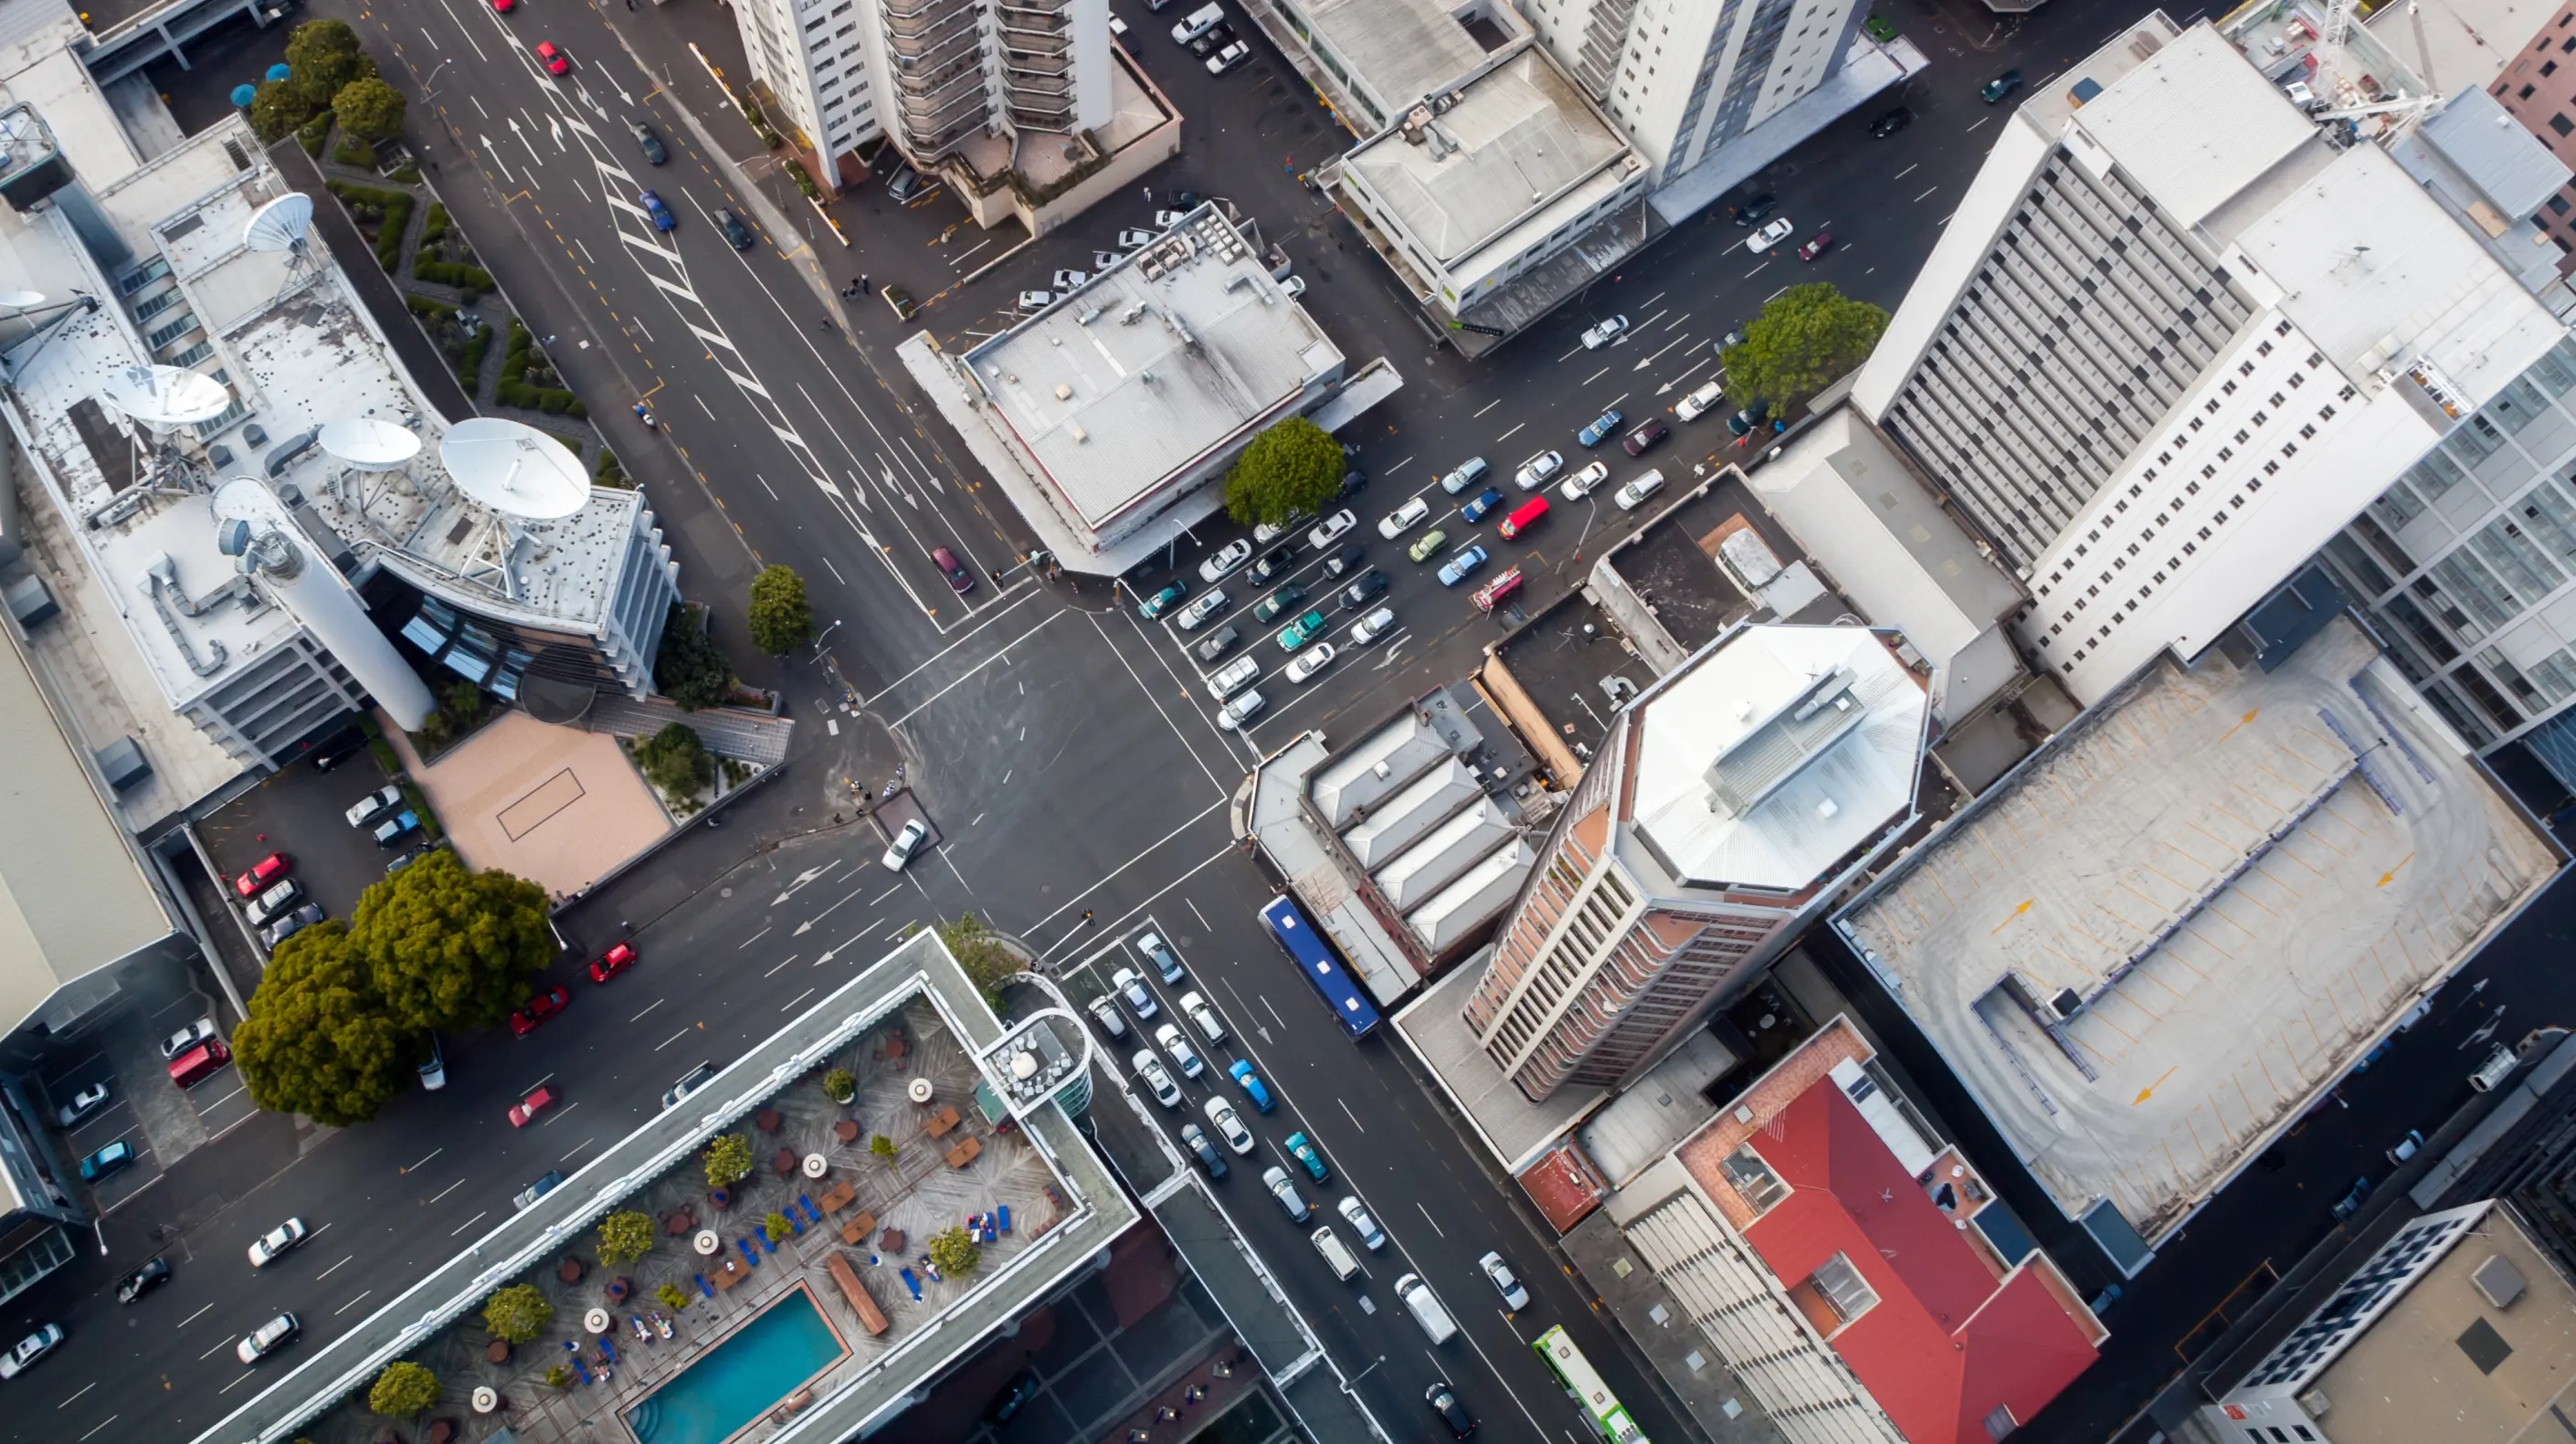 Skyview of a city's crossroad with cars waiting at a stoplight.